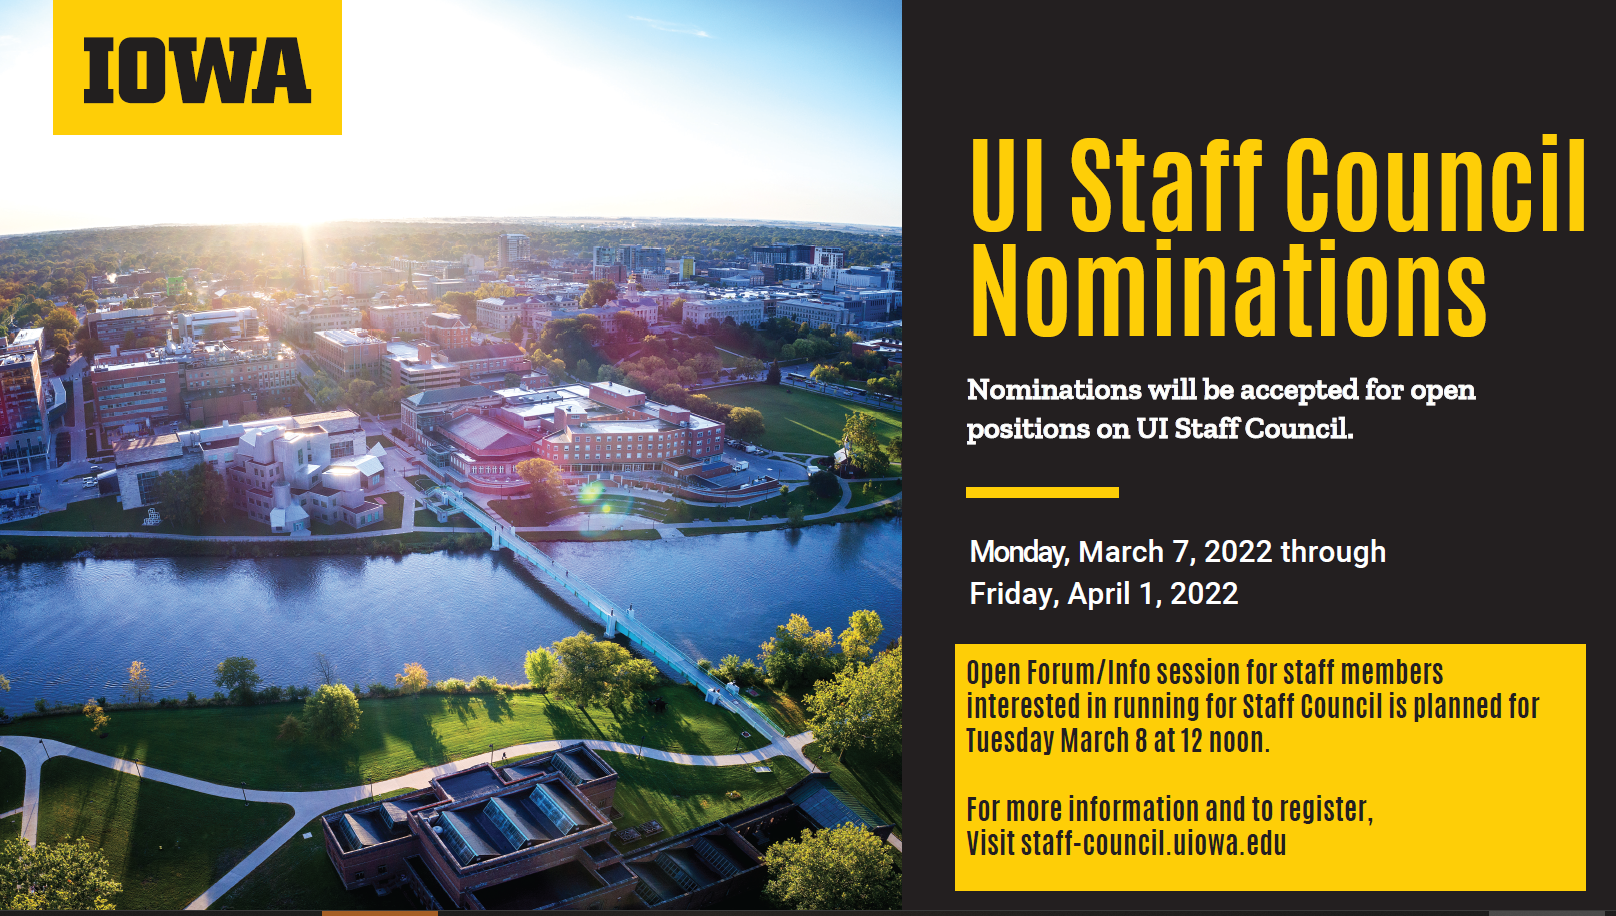 UI Staff Council Nominations – Monday, March 7, 2022 through Friday, April 1, 2022